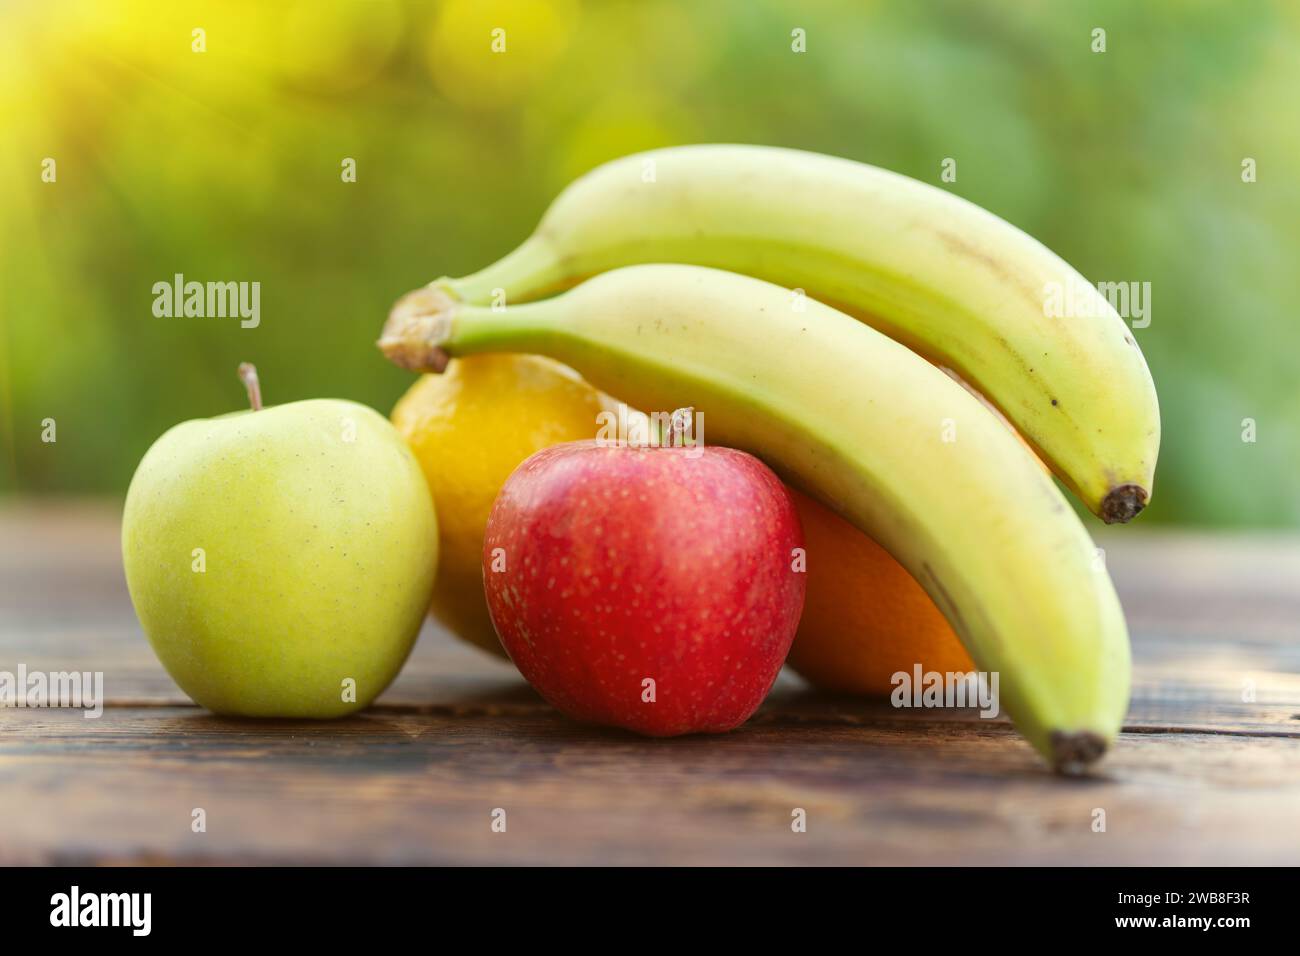 Still Life Fruits - Bananas and Apples on a wooden table against a blurred background of nature . Stock Photo